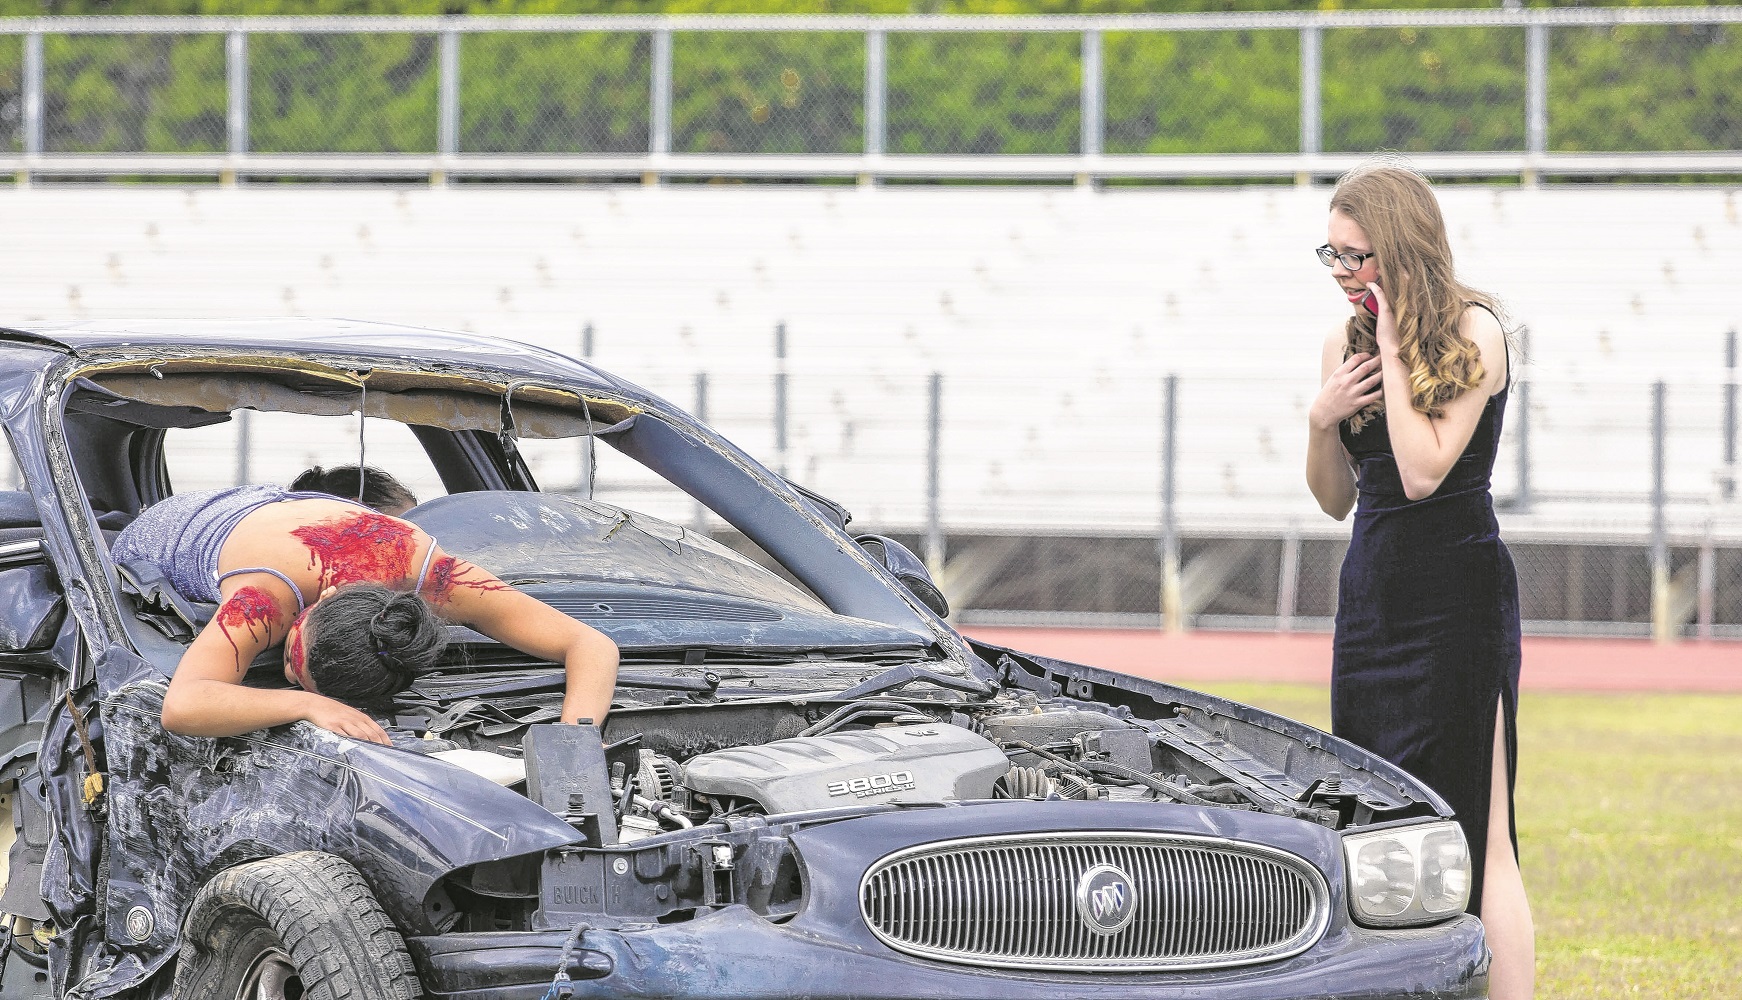 Young actors portrayed the tragic consequences of drinking and driving during a multi-agency exercise at Marcos de Niza High School. (Wrangler News photo by Alex J. Walker)